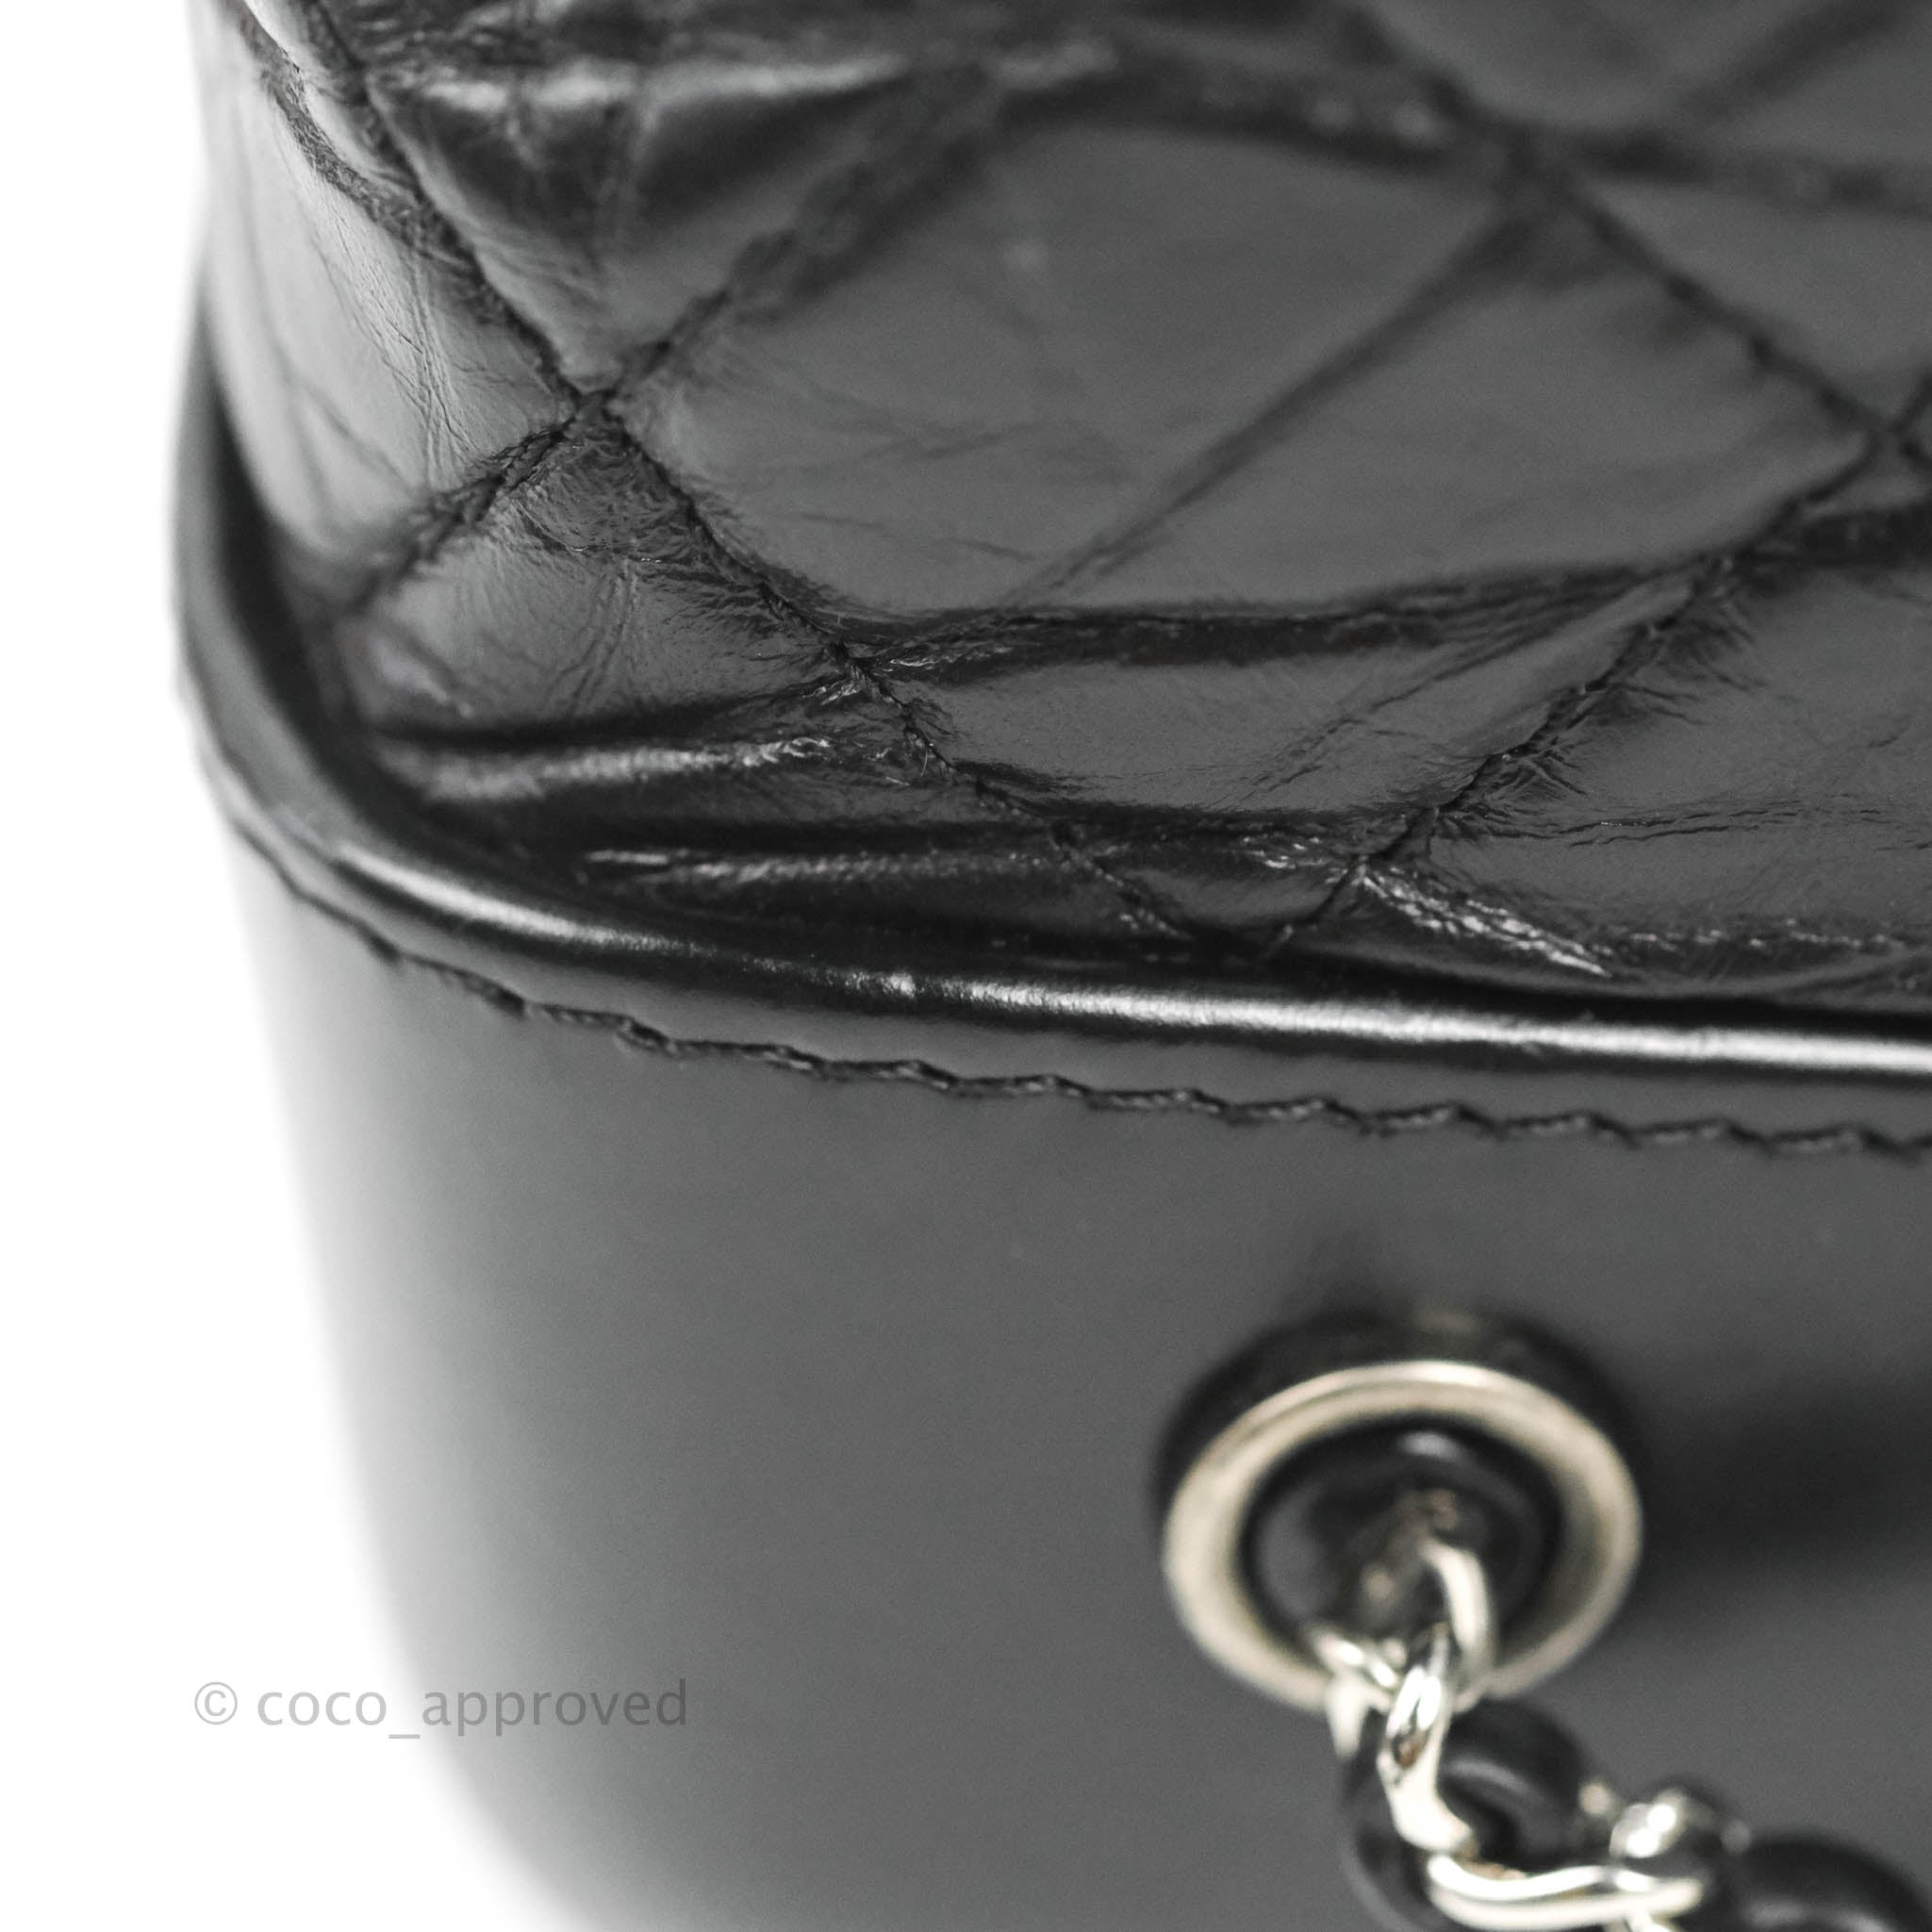 Chanel Gabrielle Backpack Black Aged Calfskin Small Black – Coco